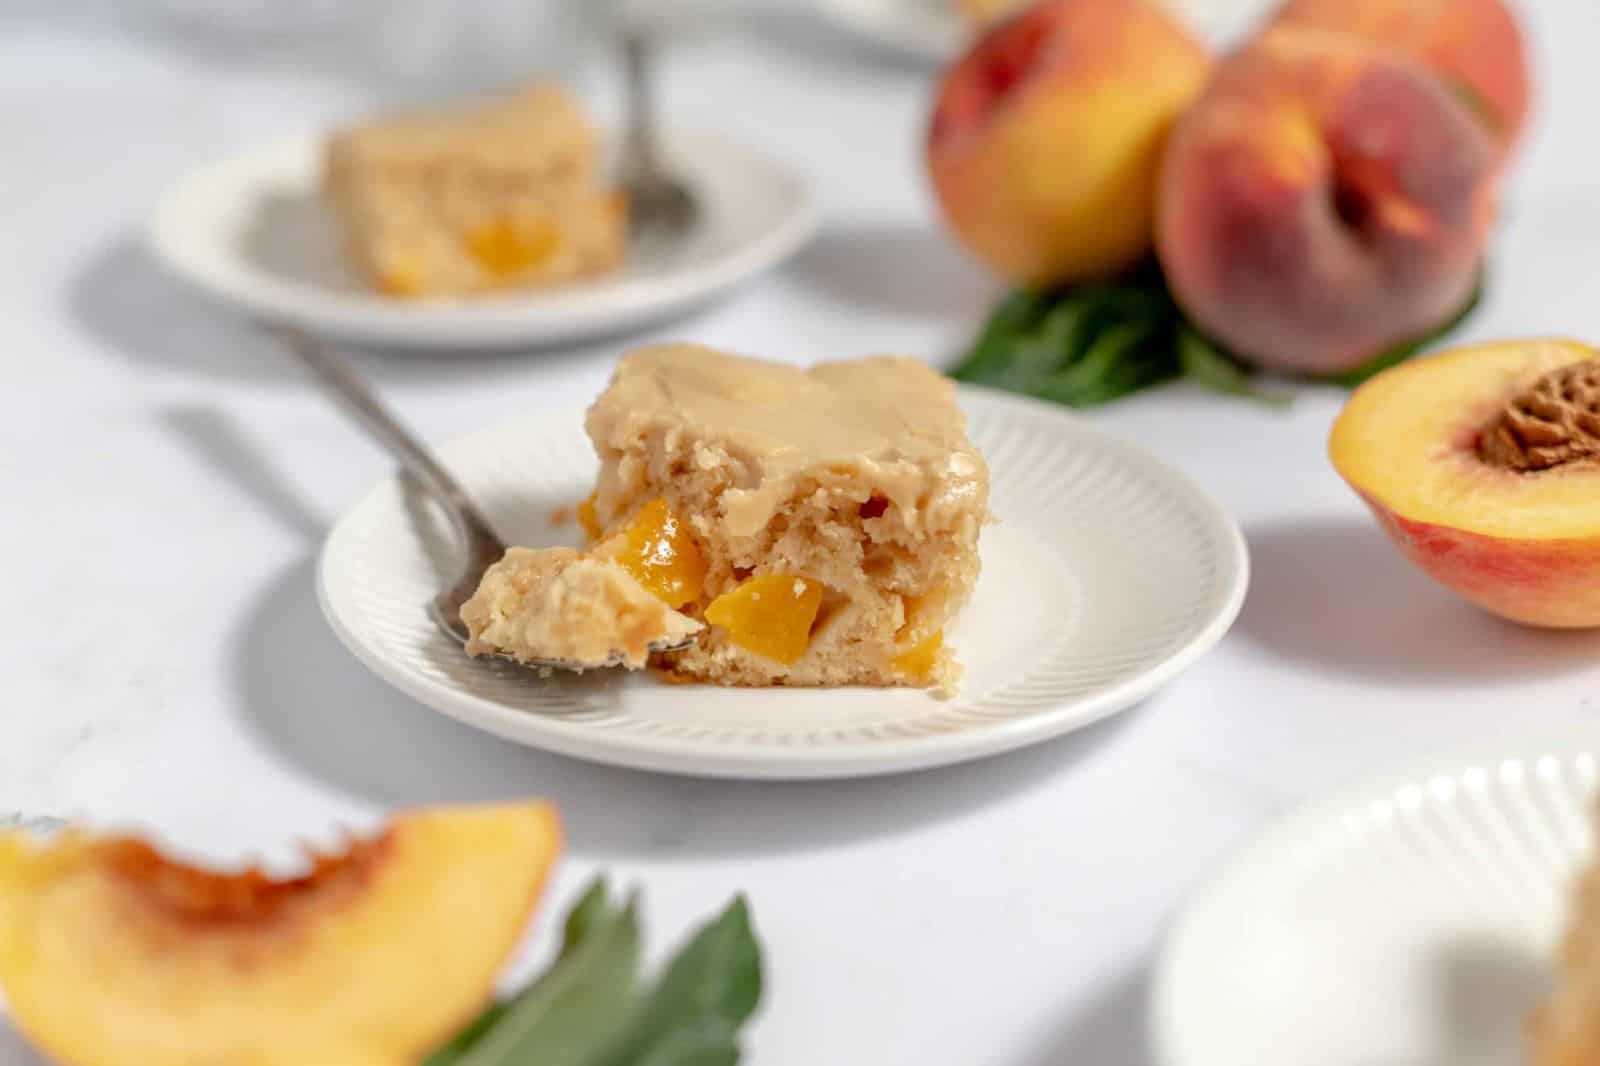 Slice of brown sugar peach cake with icing on top.